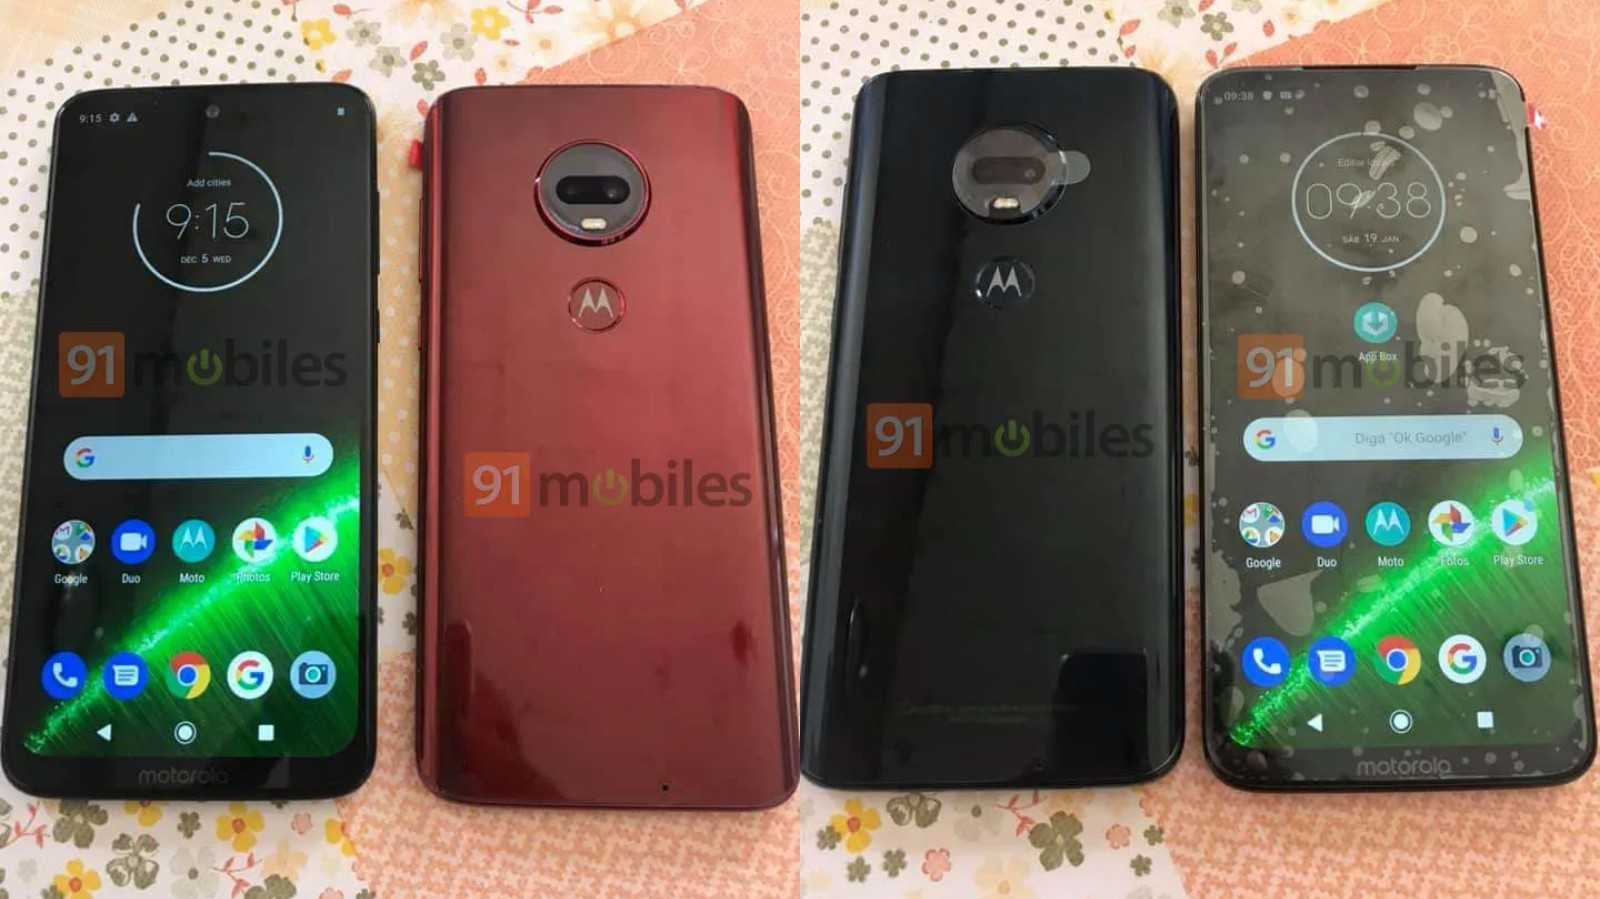 Live Images Of Moto G7 Got Leaked Showing Water Drop Notch